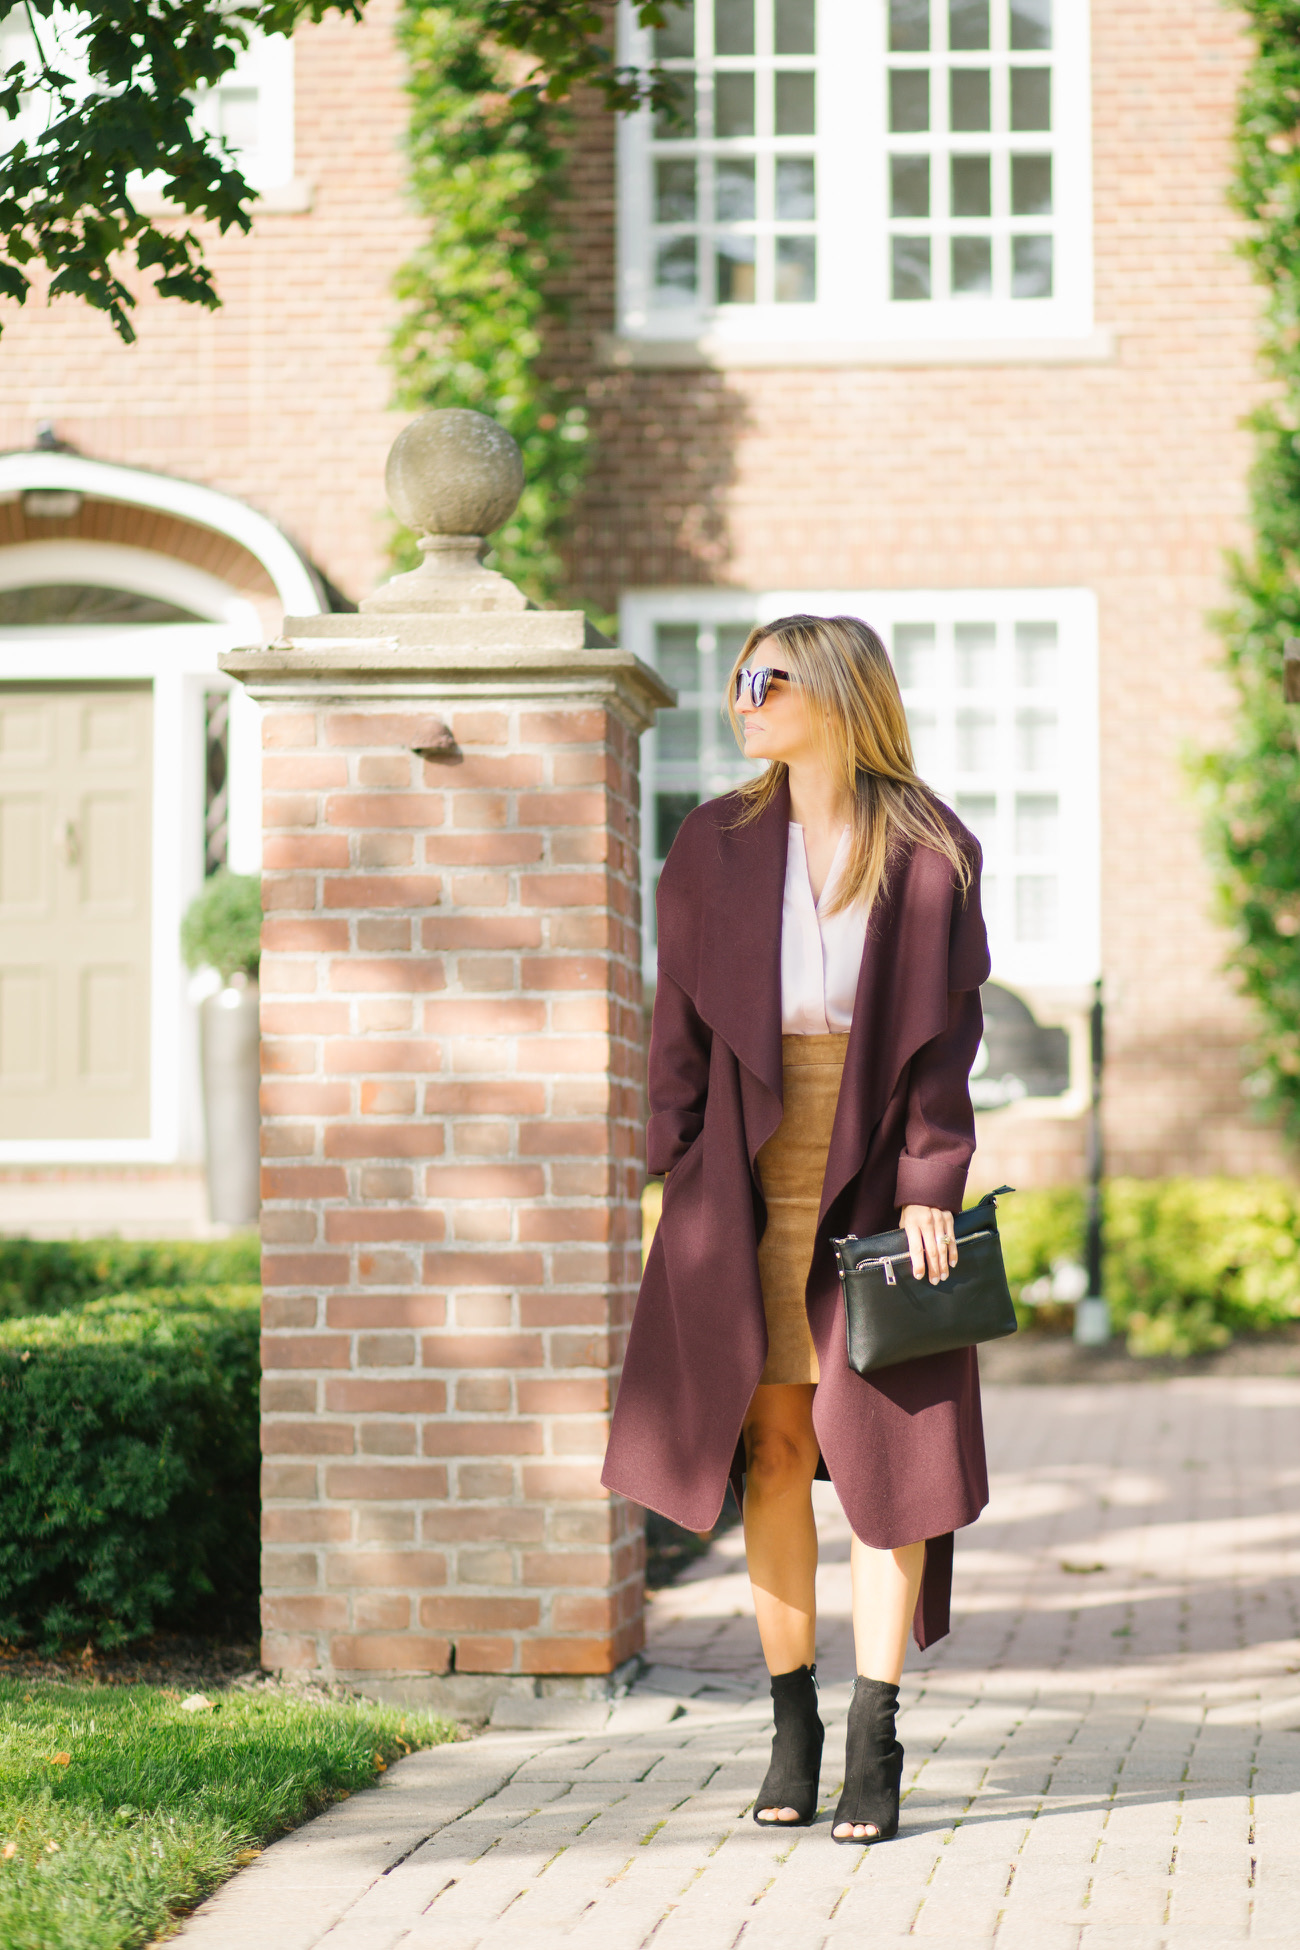 Fall Look with long burgundy coat and suede skirt